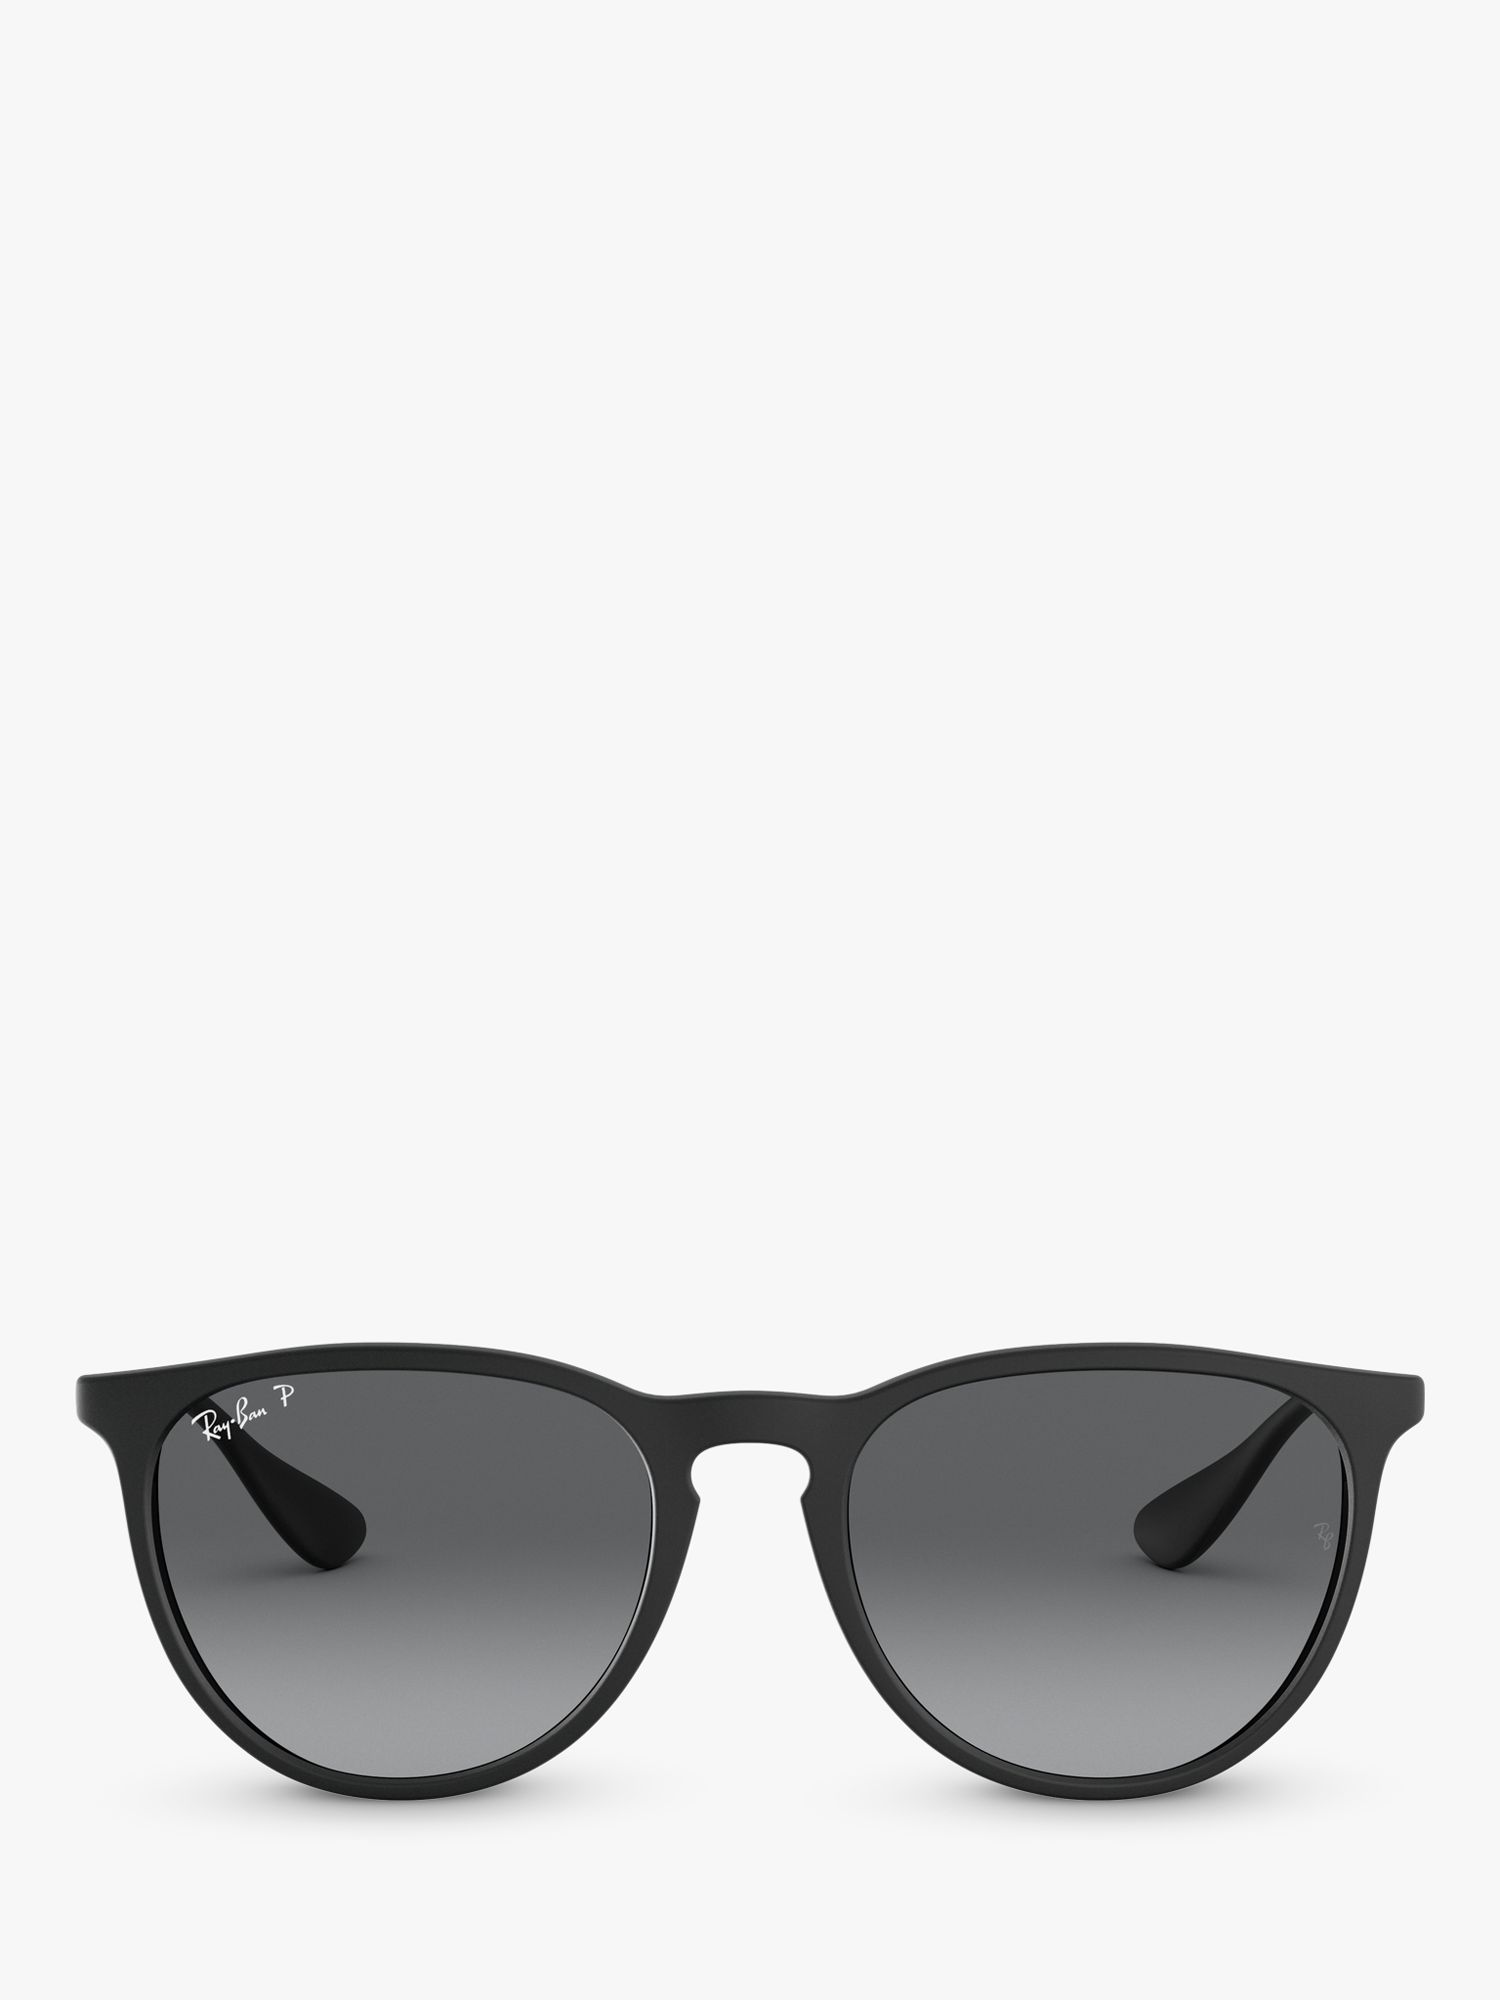 Buy Ray-Ban RB4171 Women's Erika Classic Polarised Oval Sunglasses, Black Online at johnlewis.com